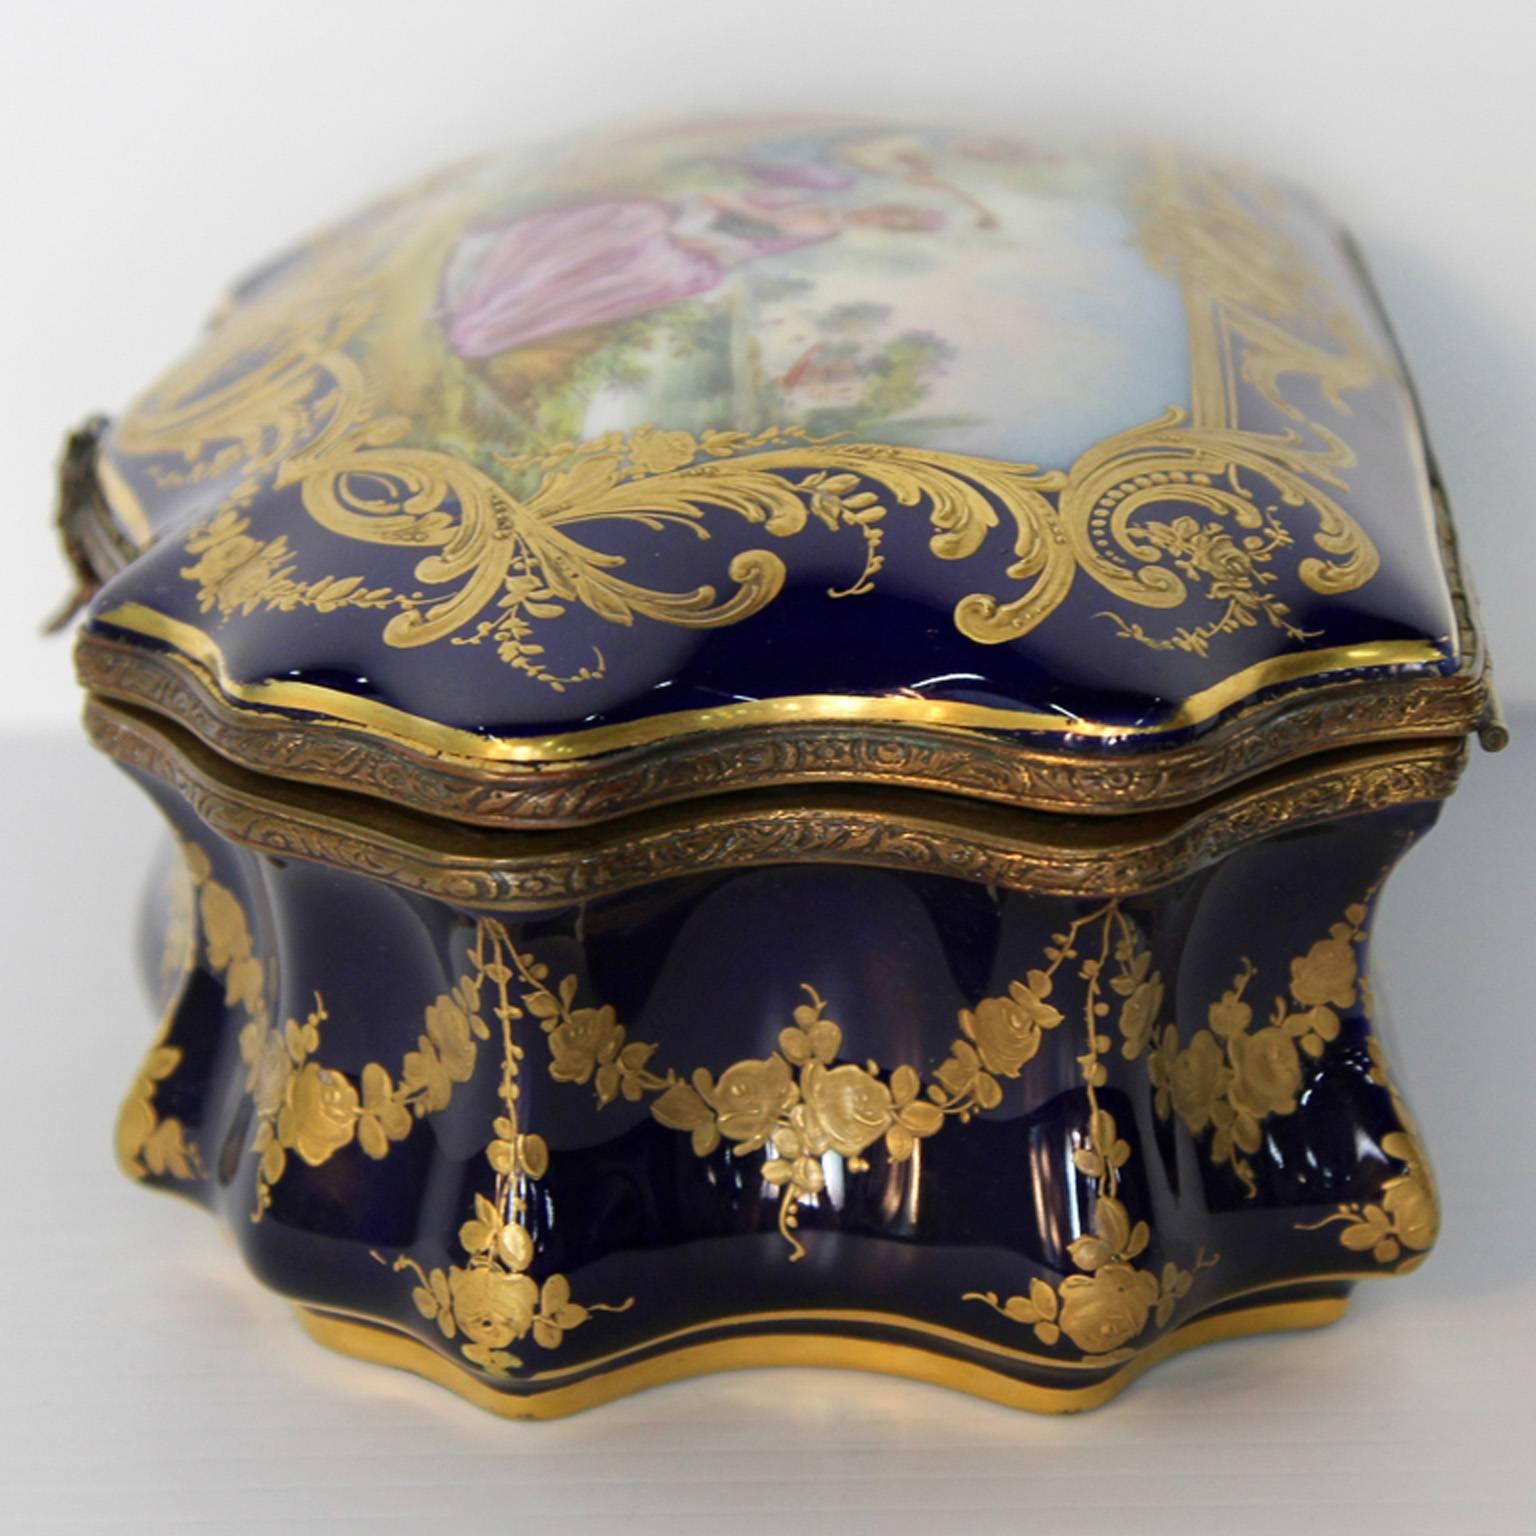 Antique Sevres Royal Imperial Cobalt Jewelry Box In Excellent Condition For Sale In Bridport, CT